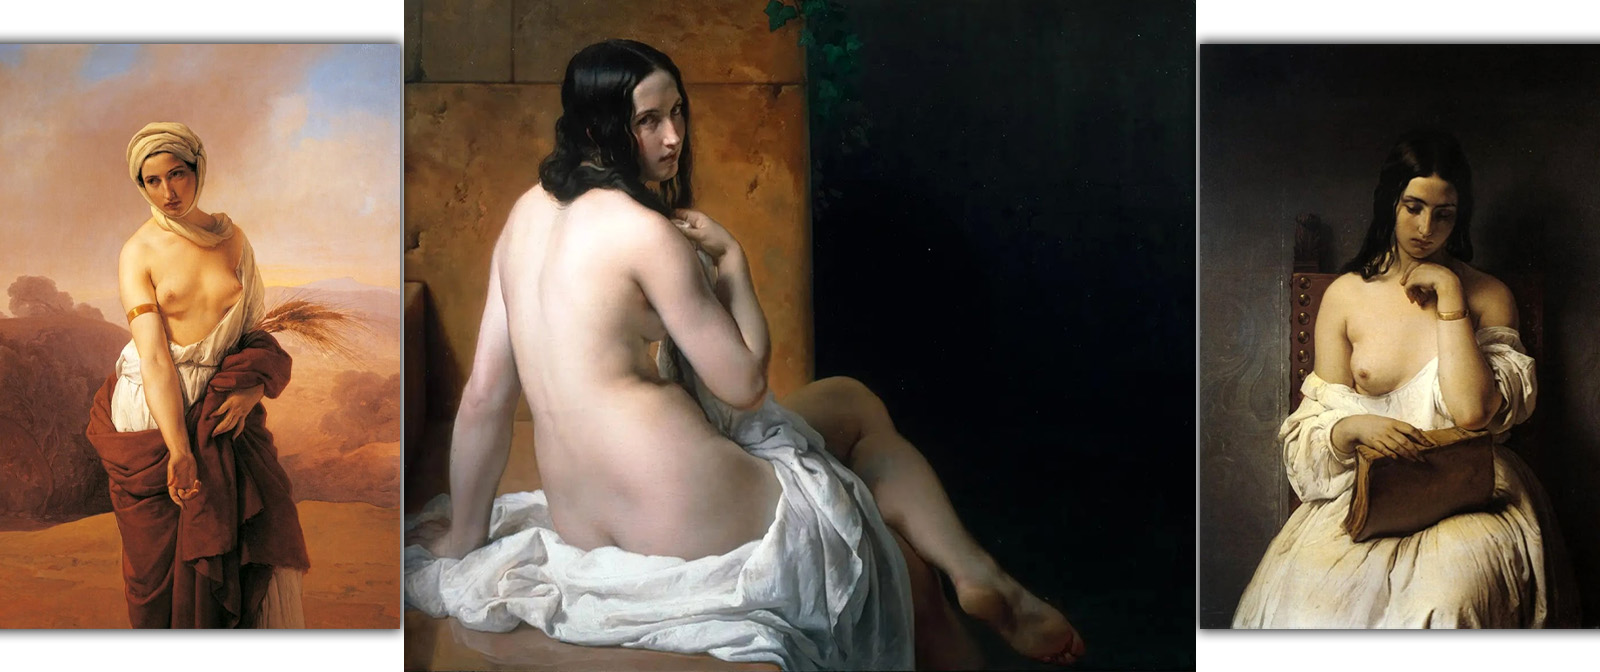 Became famous for creating nude paintings. Italian artist Francesco Ayetz and his sensual works.